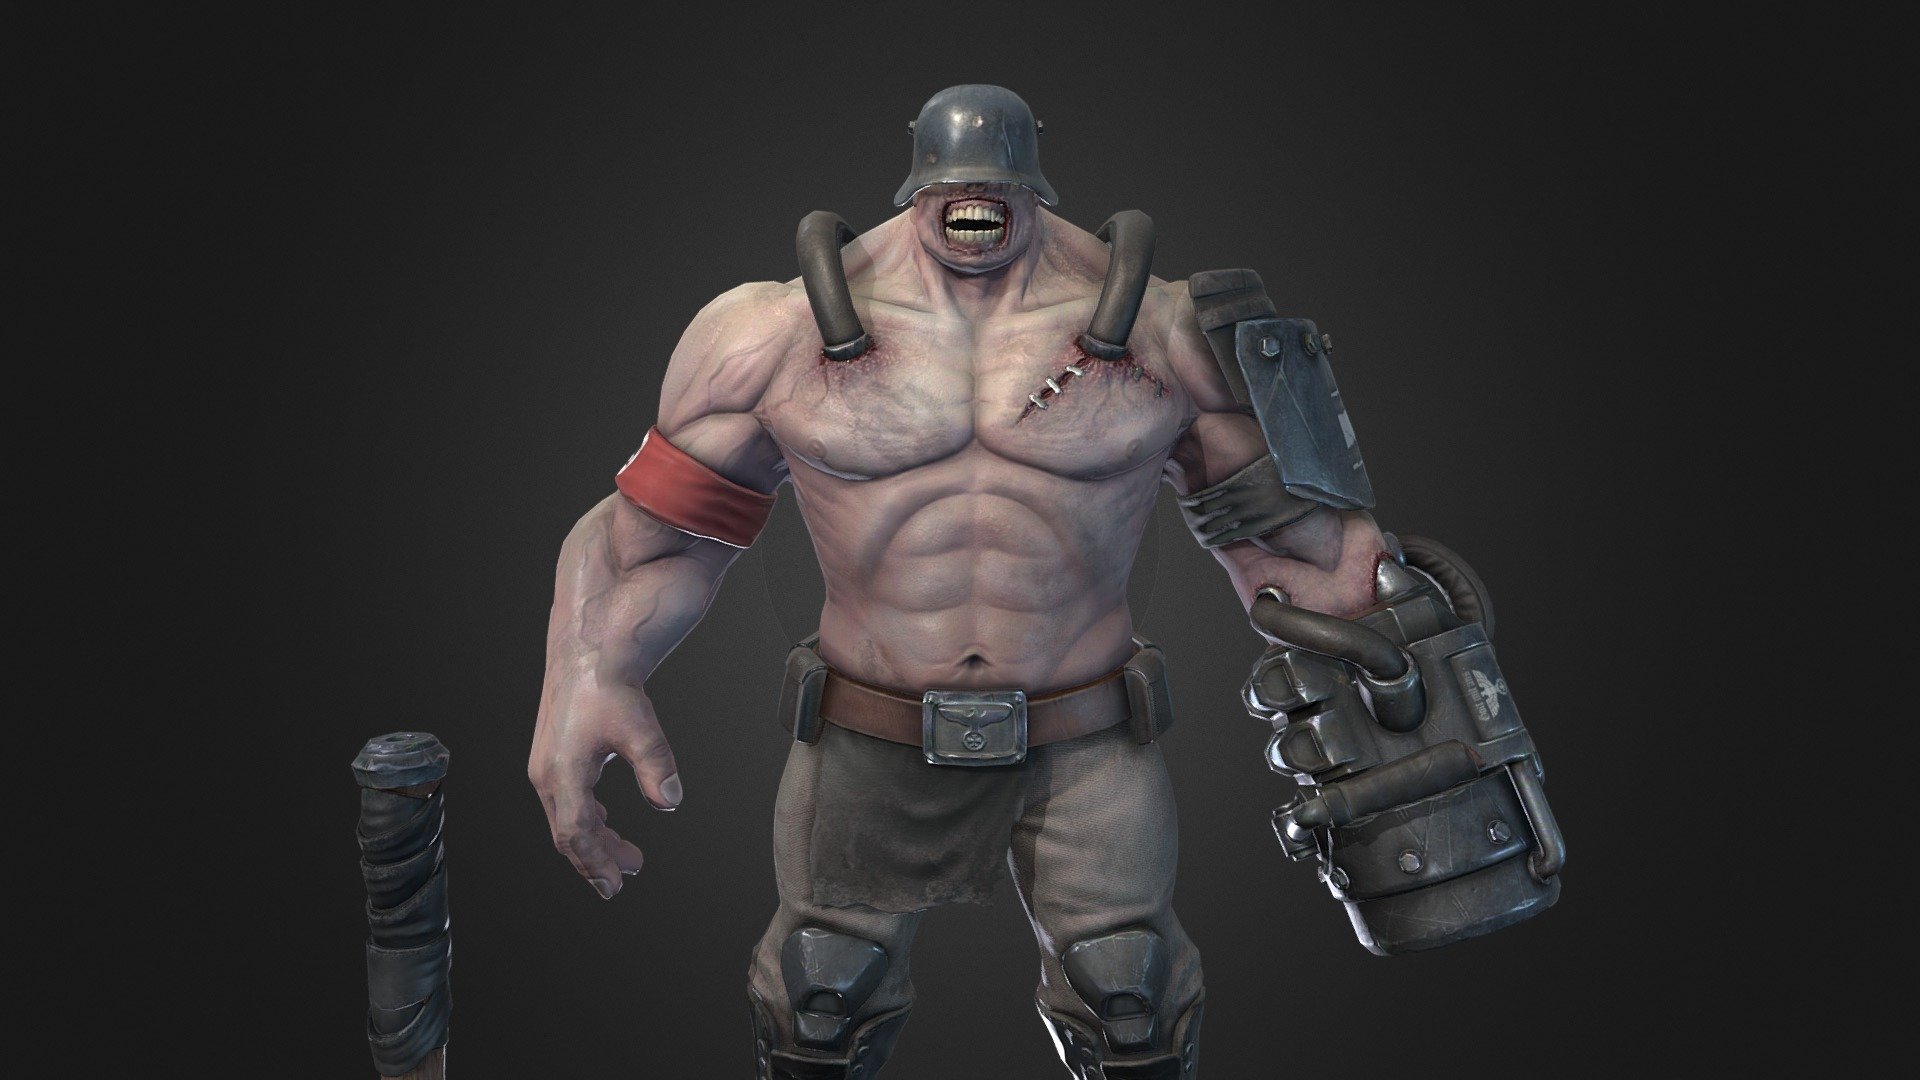 Model Thor Super Soldier Of The Third Reich

A Game Ready lowpoly Character with PBR Textures.

3dsmax
Rigged, Skinned &amp; Animated Chracter in 3dsmax 2017 Rig done with Biped and Skin

Textures
Resoluton 4096x4096 Textures for Character has multiple textures sets pro logical equipment Diffuse Normal Glossines Specular Emissive

Format png

Animation included 3dsmax &amp; FBX -Included Animation See attachment file

Idle, Walk, 3 Attacks, Death 3d model